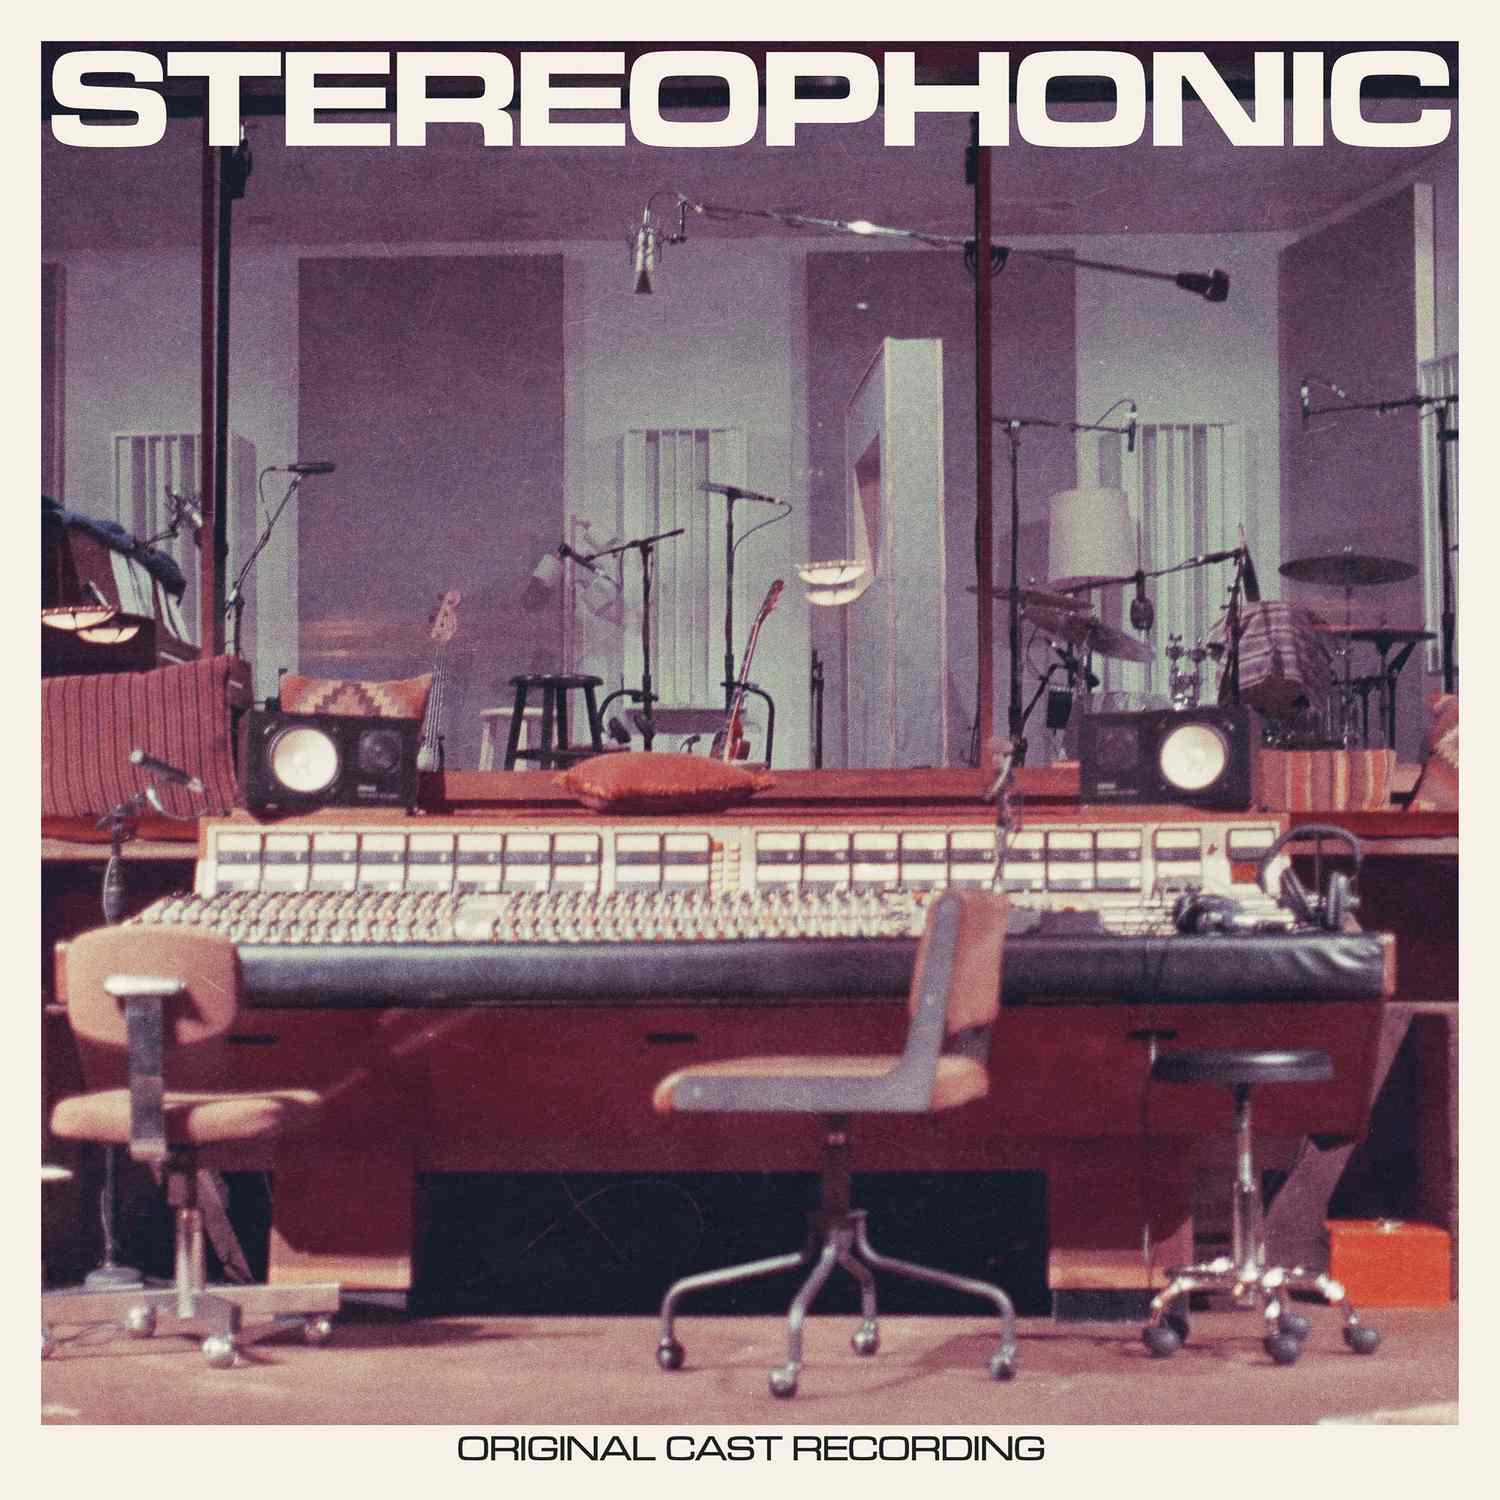 STEREOPHONIC OCR artwork